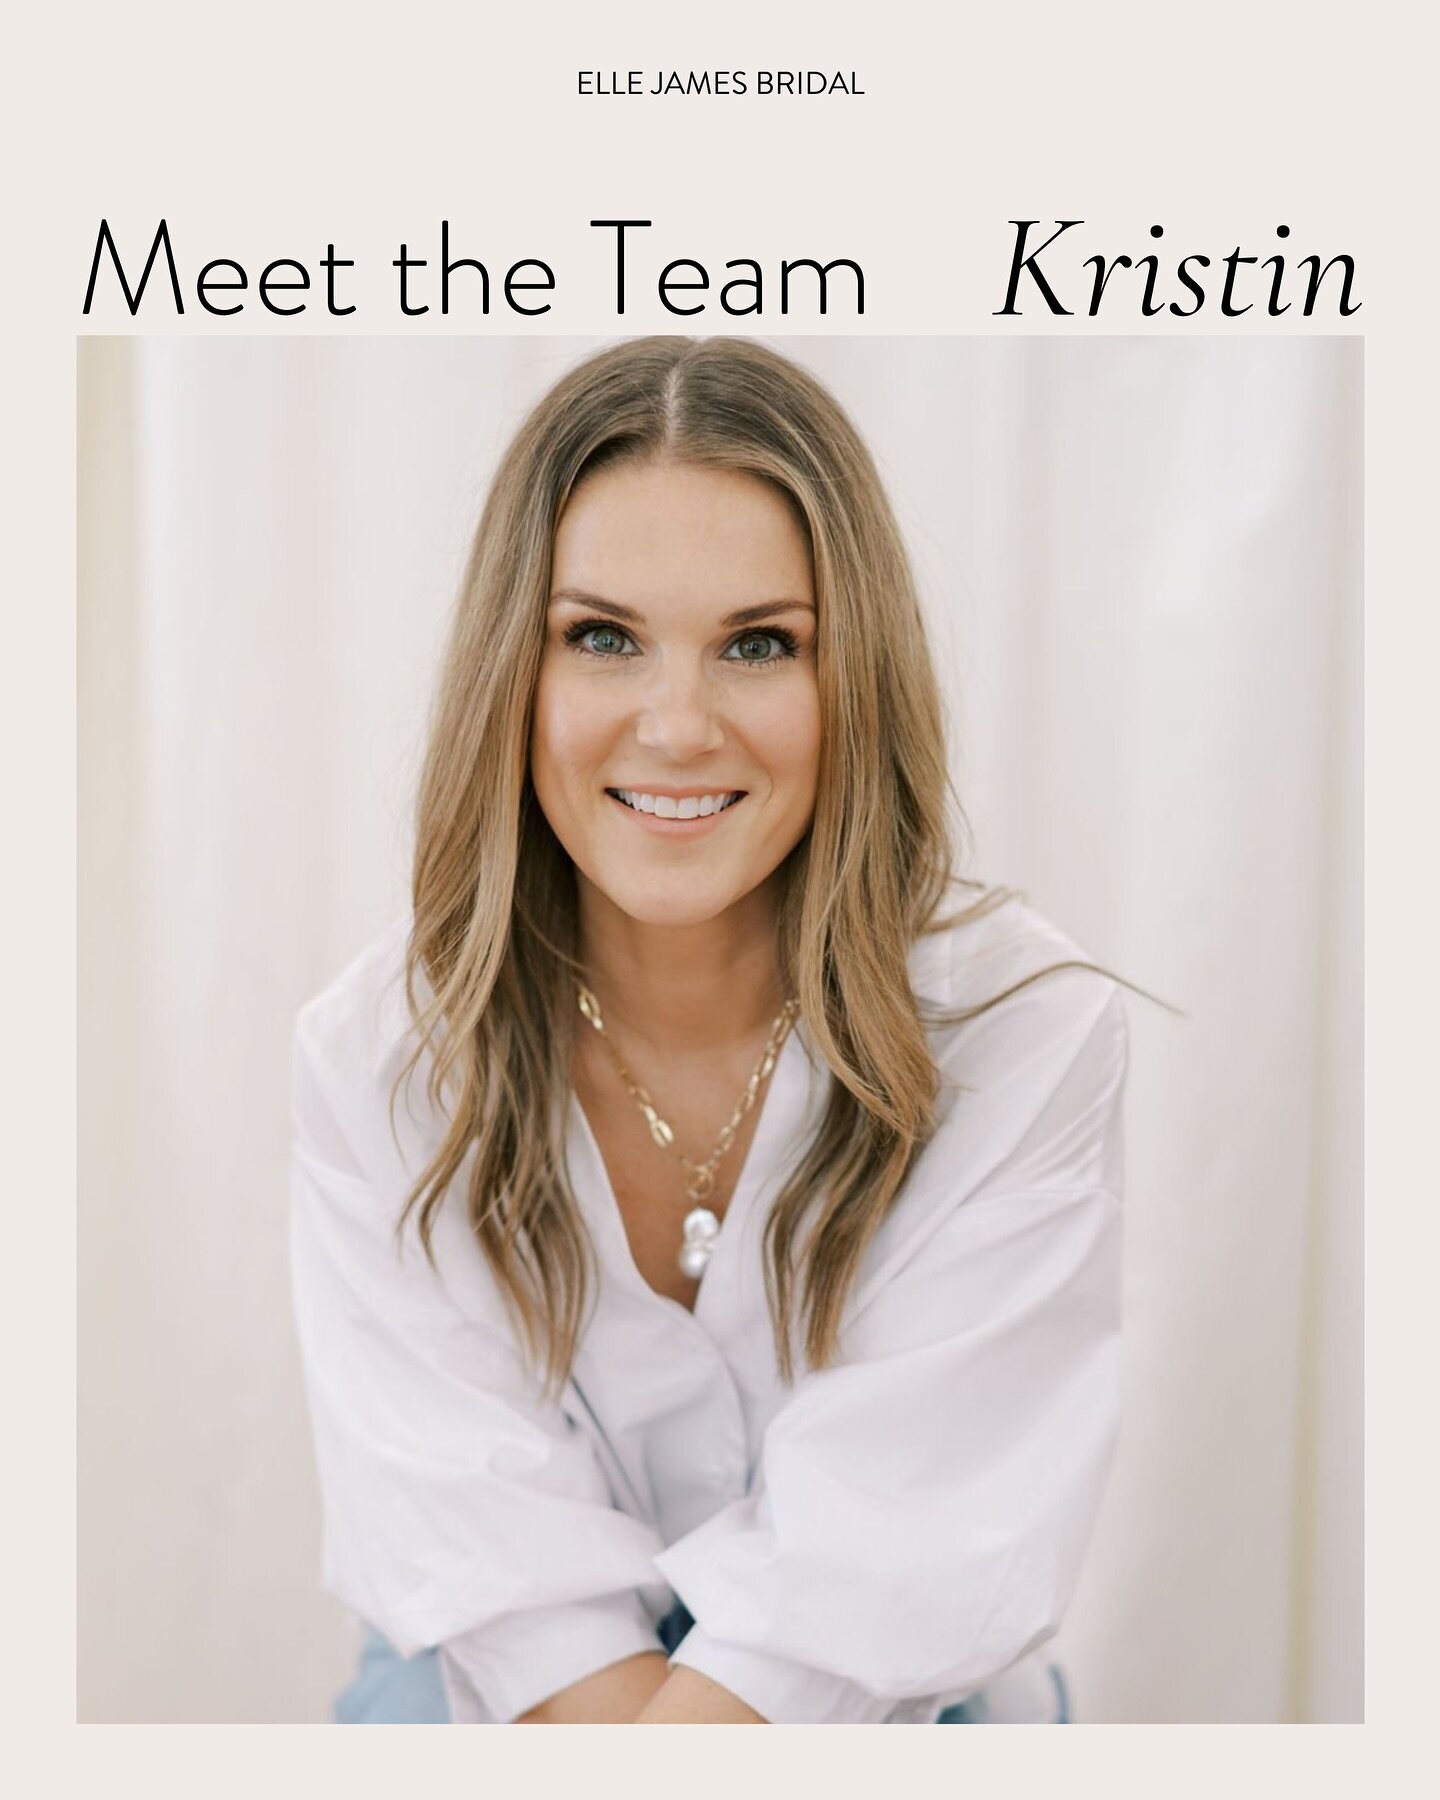 MEET THE TEAM | @kristinpanetta
- Owner at Elle James Bridal 🤍 -

𝗖𝗼𝗳𝗳𝗲𝗲 𝗼𝗿𝗱𝗲𝗿: It&rsquo;s always different depending on my mood and the weather but I always love a latte (hot or iced) with two pumps of toffee nut.

𝗣𝗲𝘁𝘀: Does 3 kids 